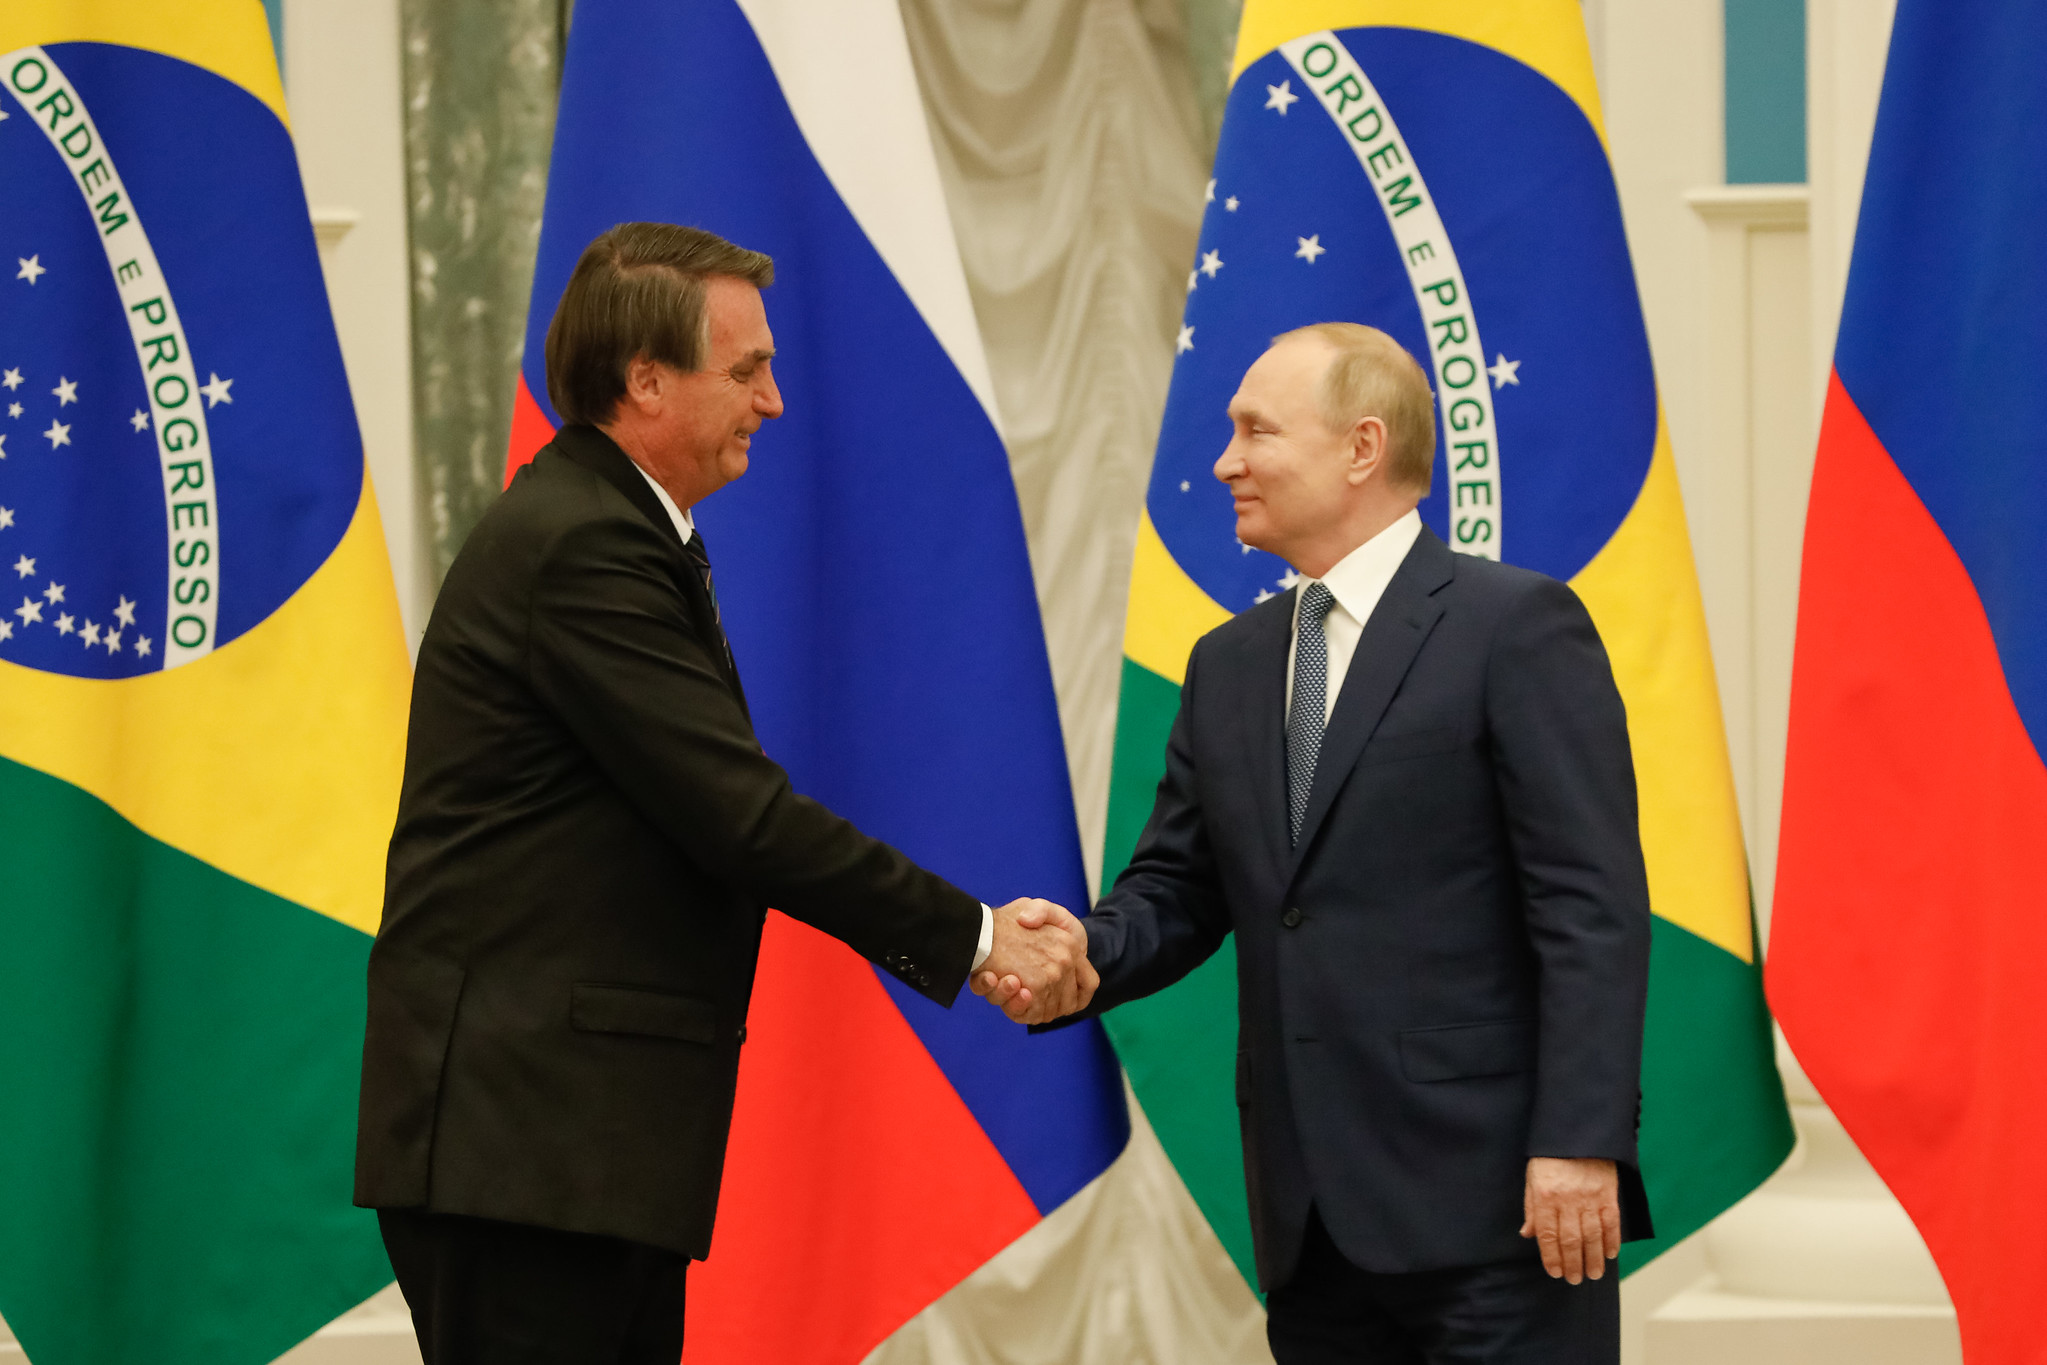 Russian Invasion of Ukraine Reveals Incoherence of Jair Bolsonaro’s Foreign Policy